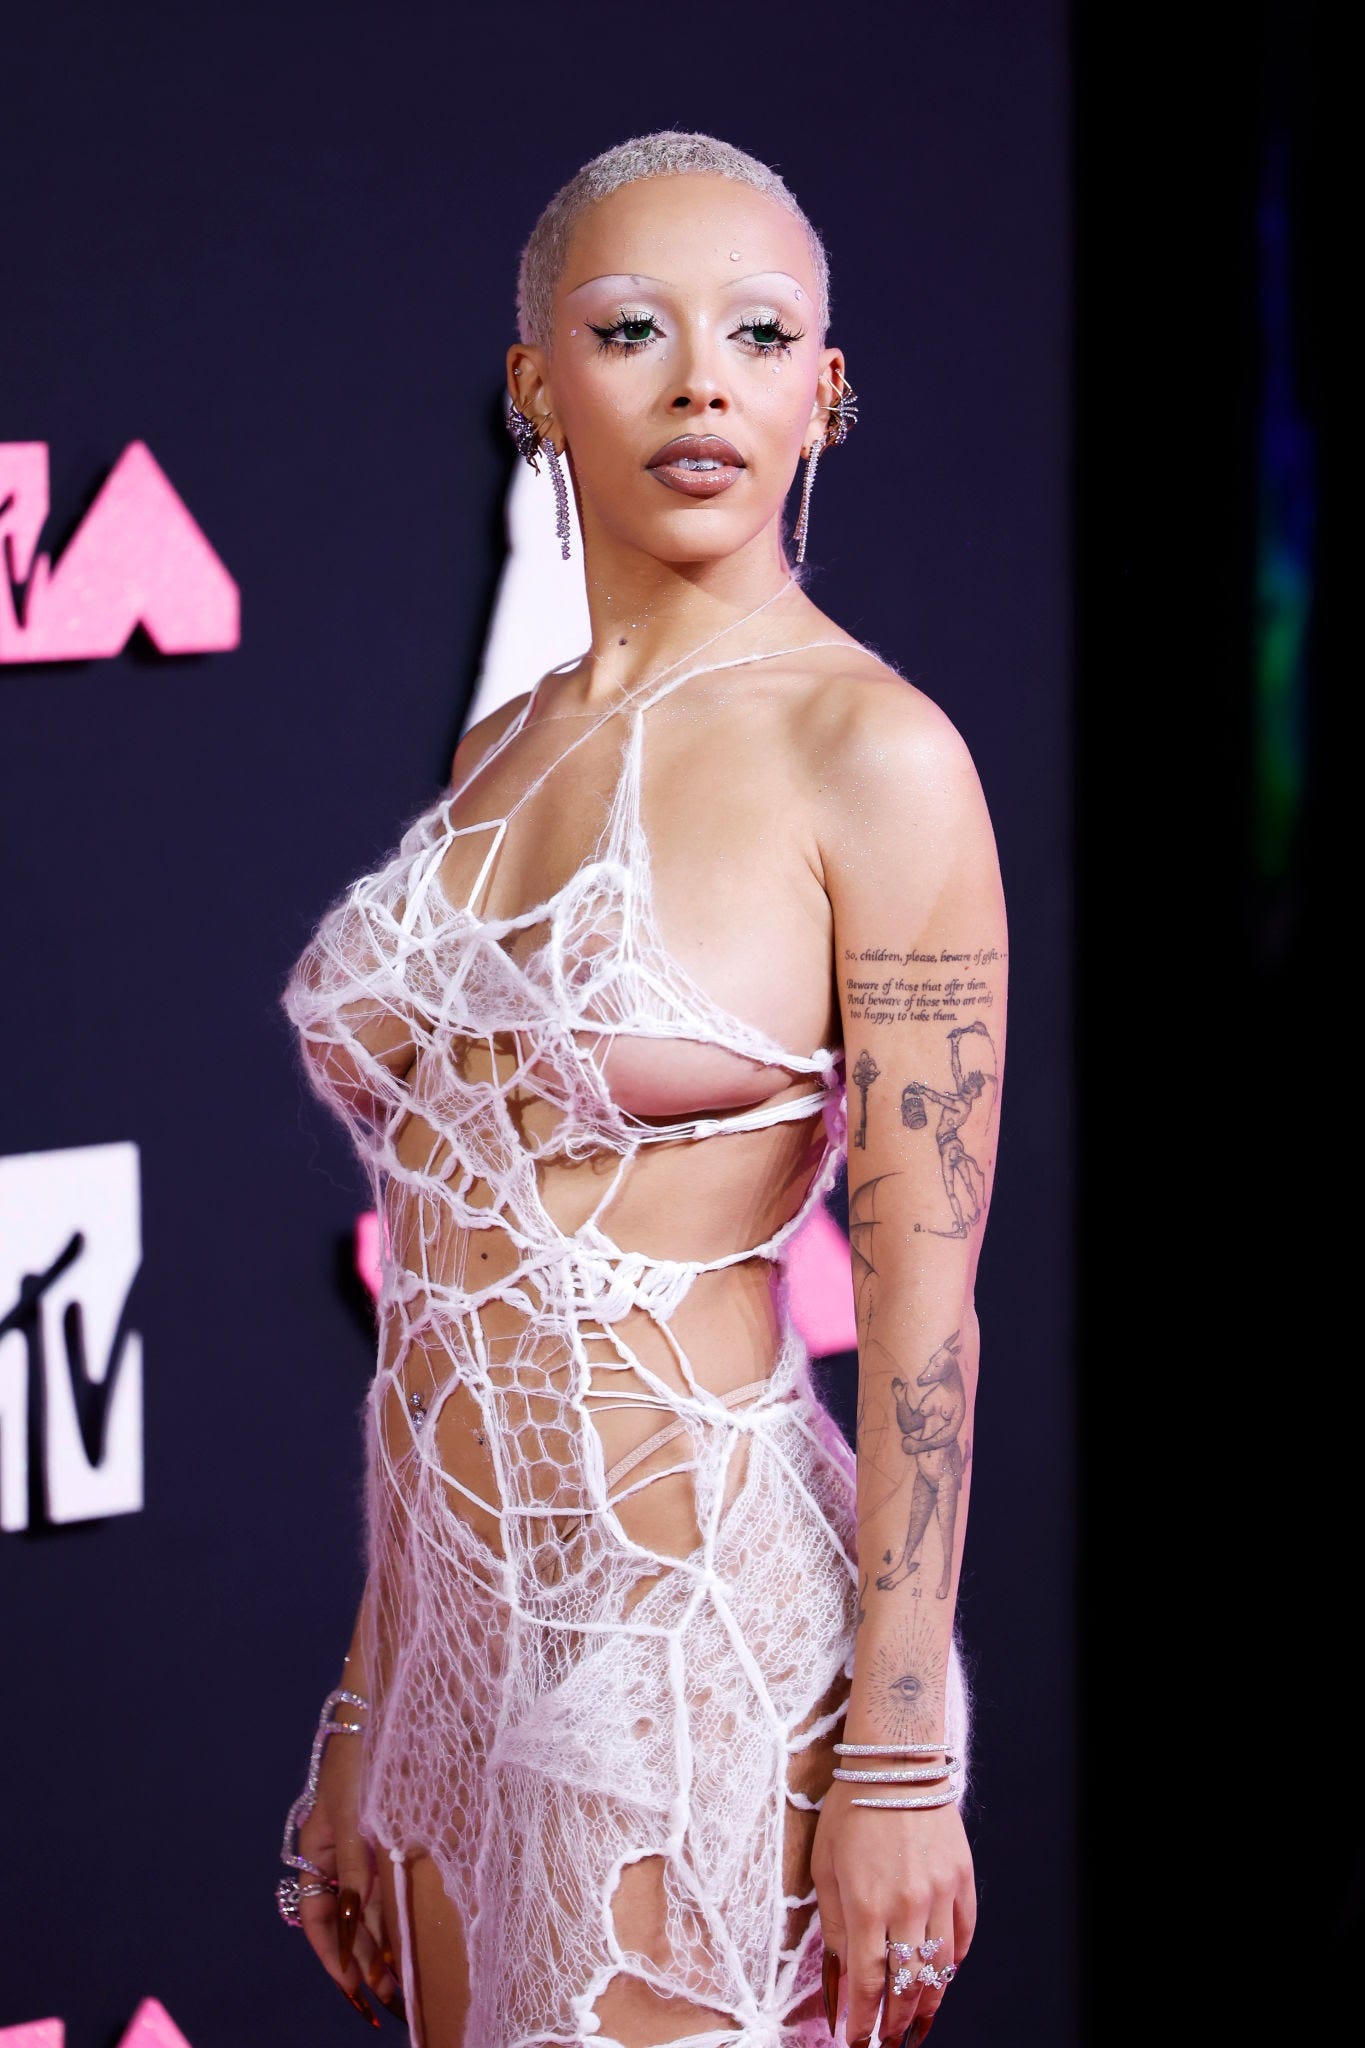 Jason Kempin/Getty Images for MTV